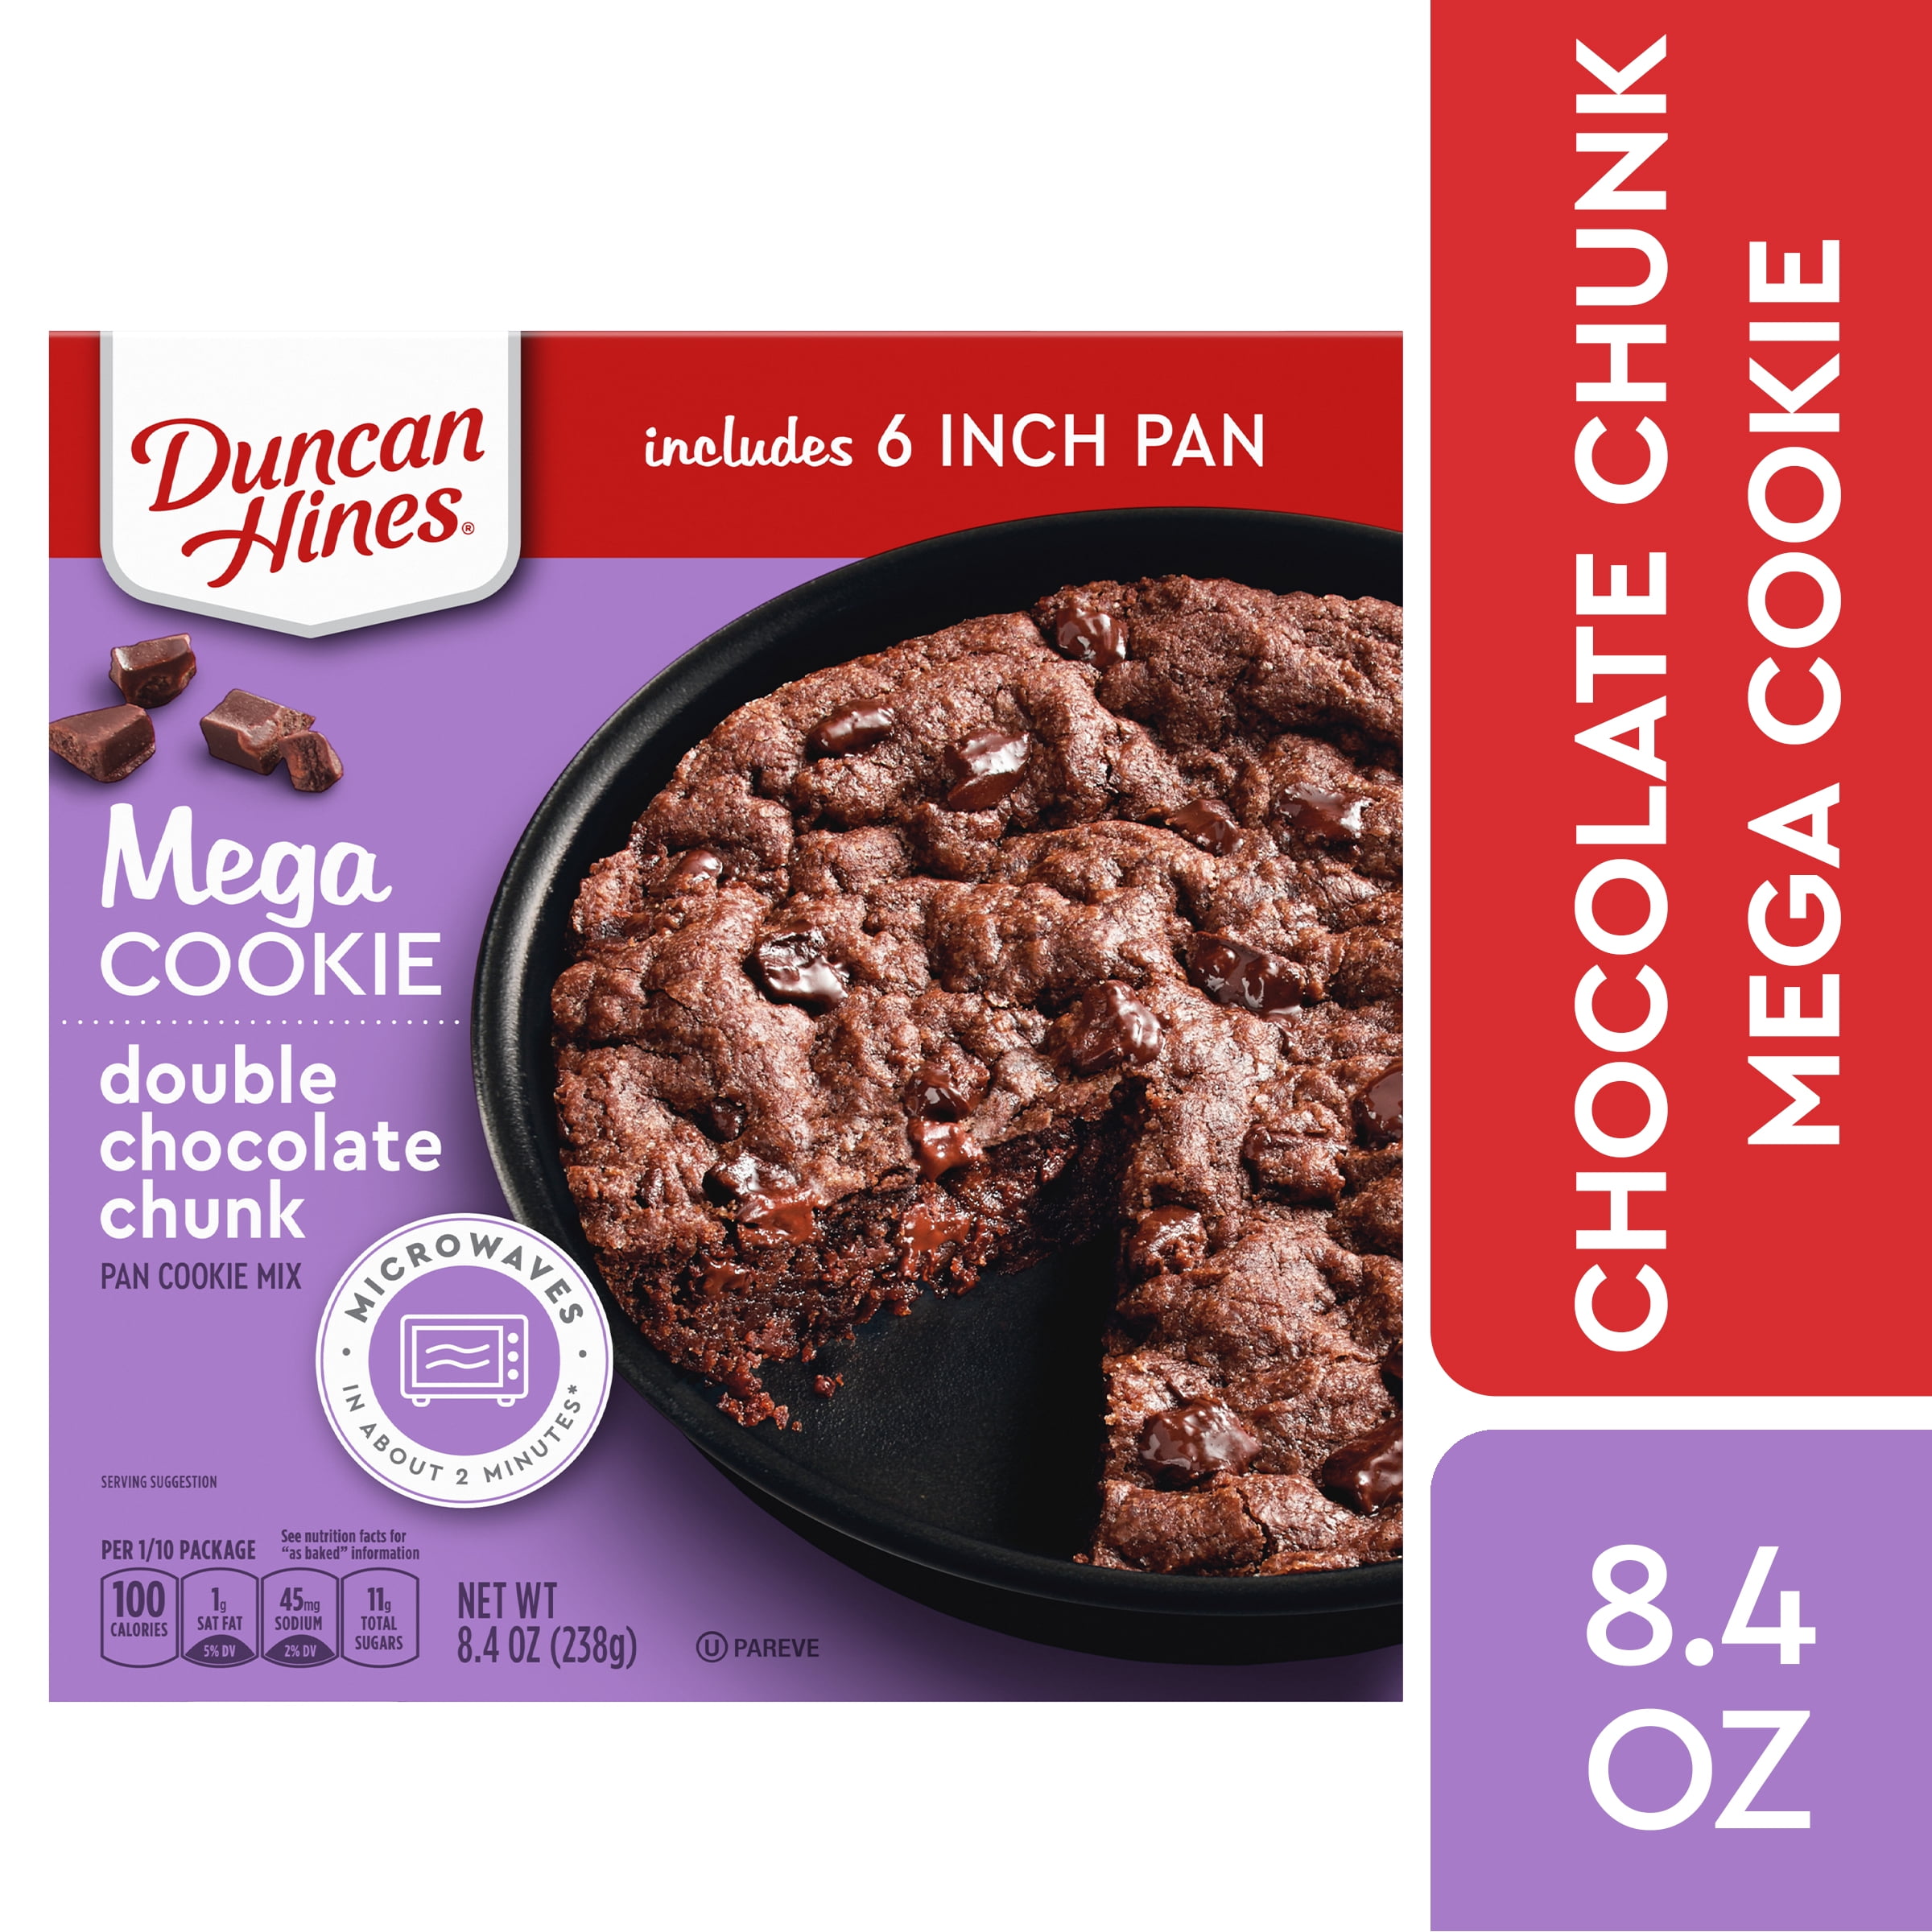 Recipe For Cookies From Duncan Hines Cake Mix / Recipe Devil S Food Fudge Cookies Duncan Hines Canada